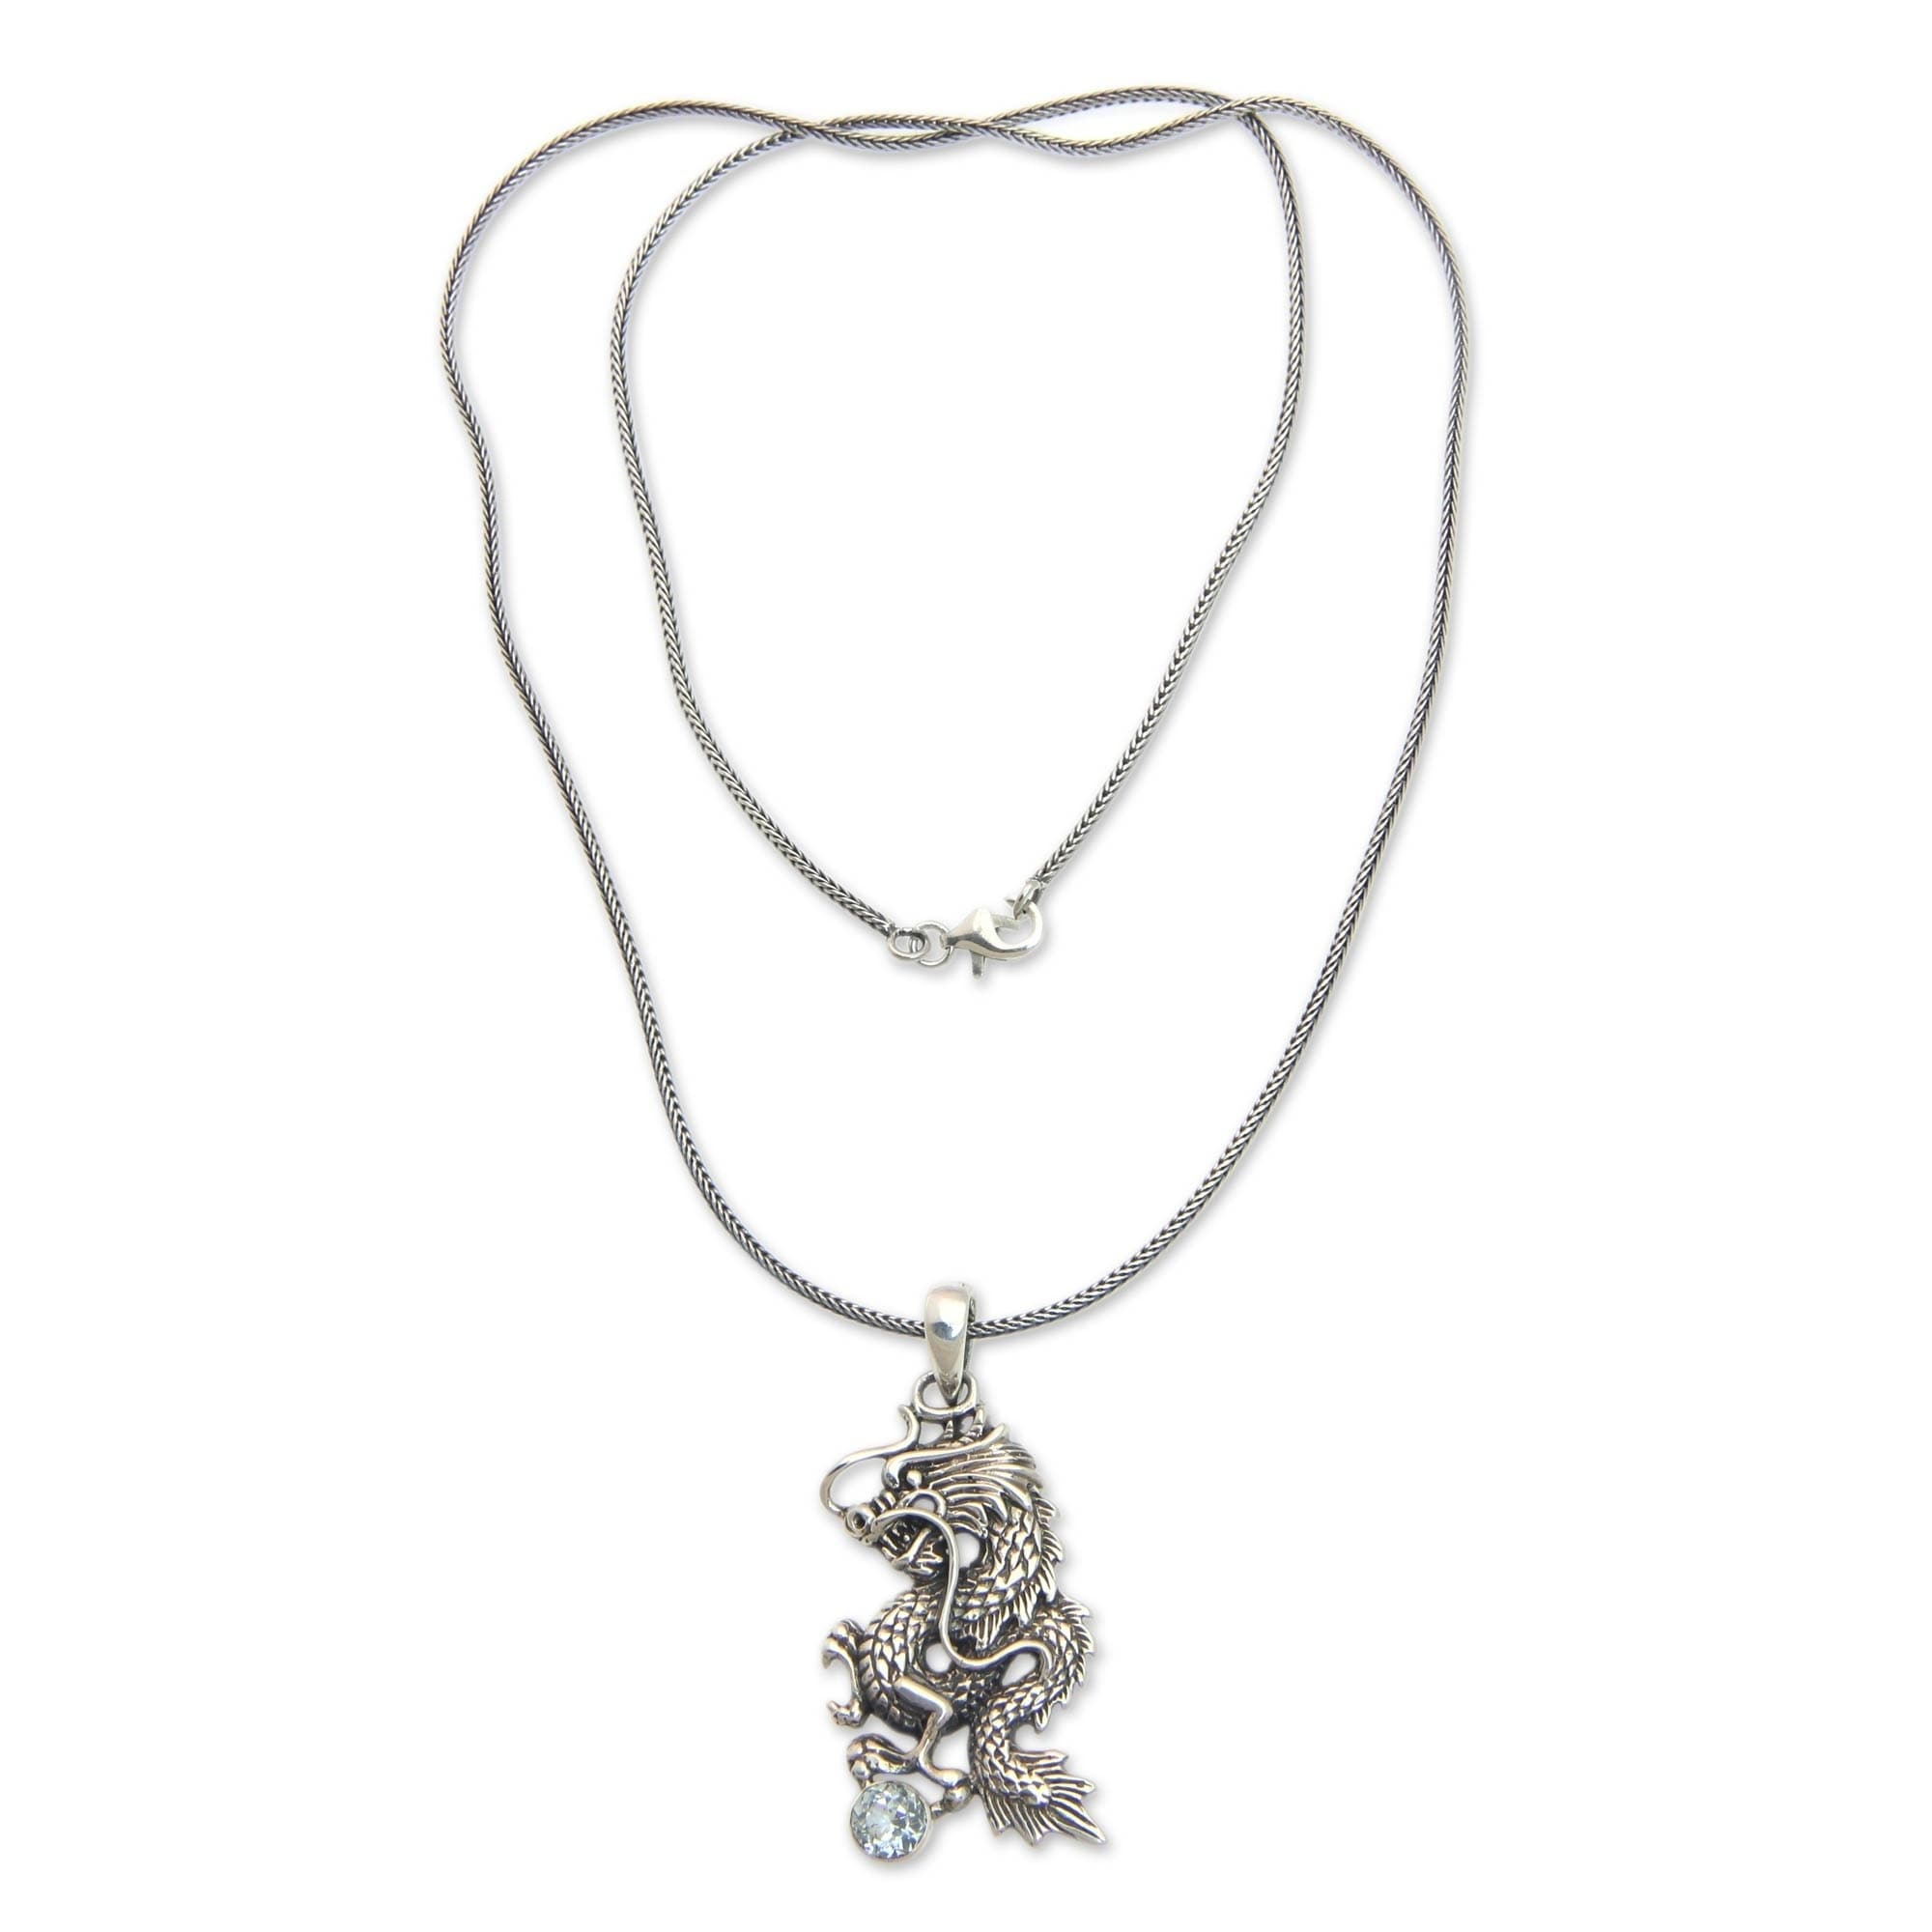 18-Inch Rhodium Plated Necklace with 6mm Light Rose Birthstone Beads and Sterling Silver Maria Stein Charm.